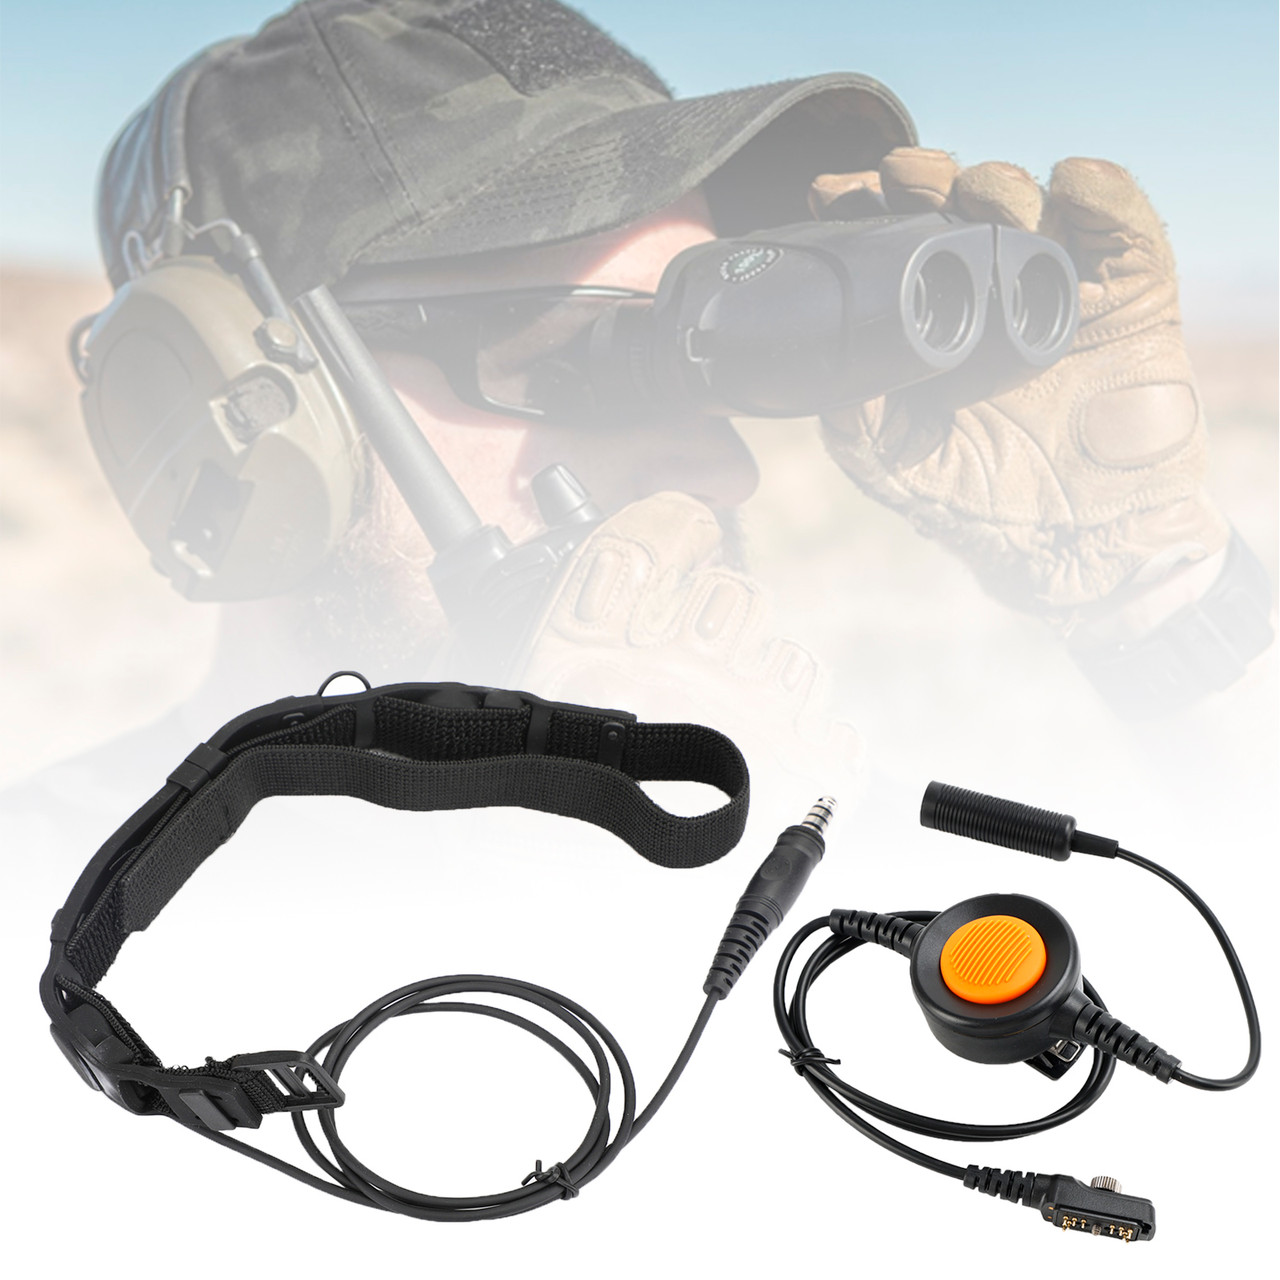 Tactical Throat Tube Mic 7.1mm Plug Headset For Hytera PD780/700/580/788/782/785